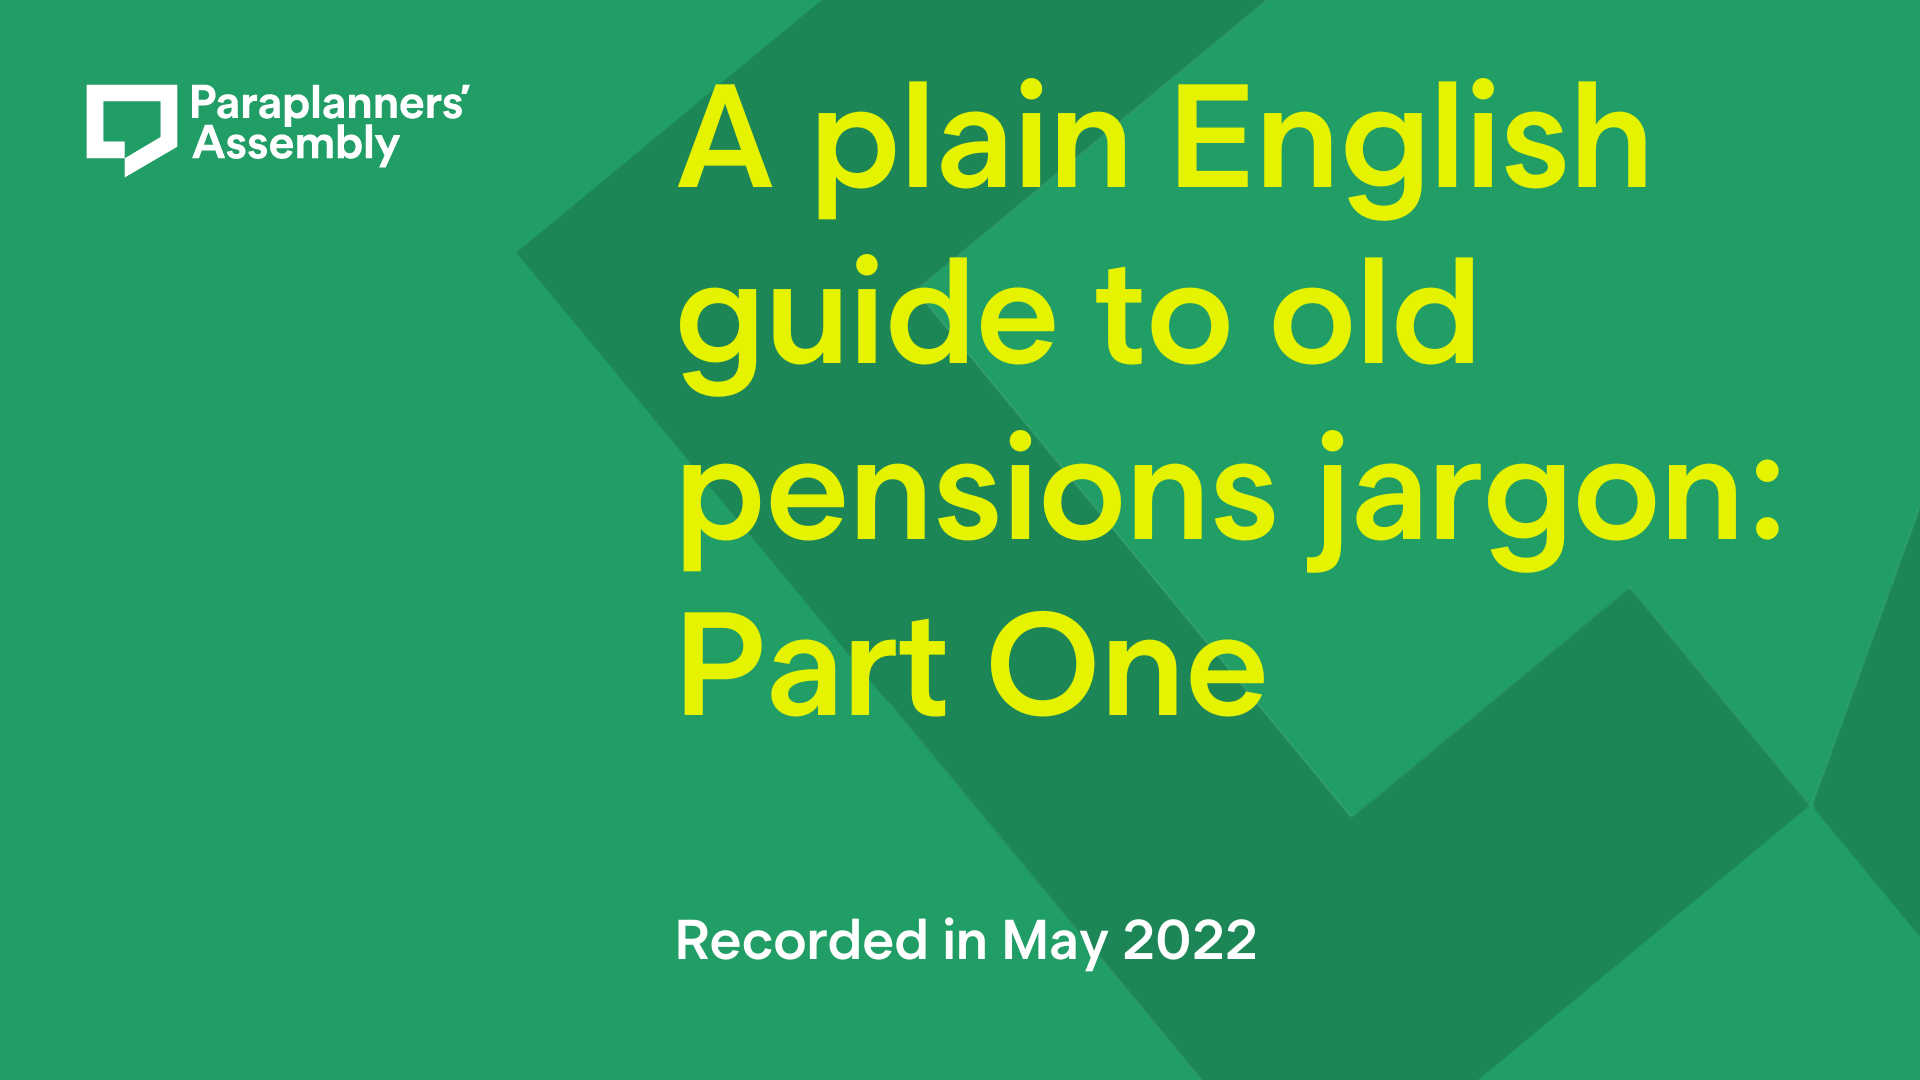 A plain English guide to old pensions jargon: Part One